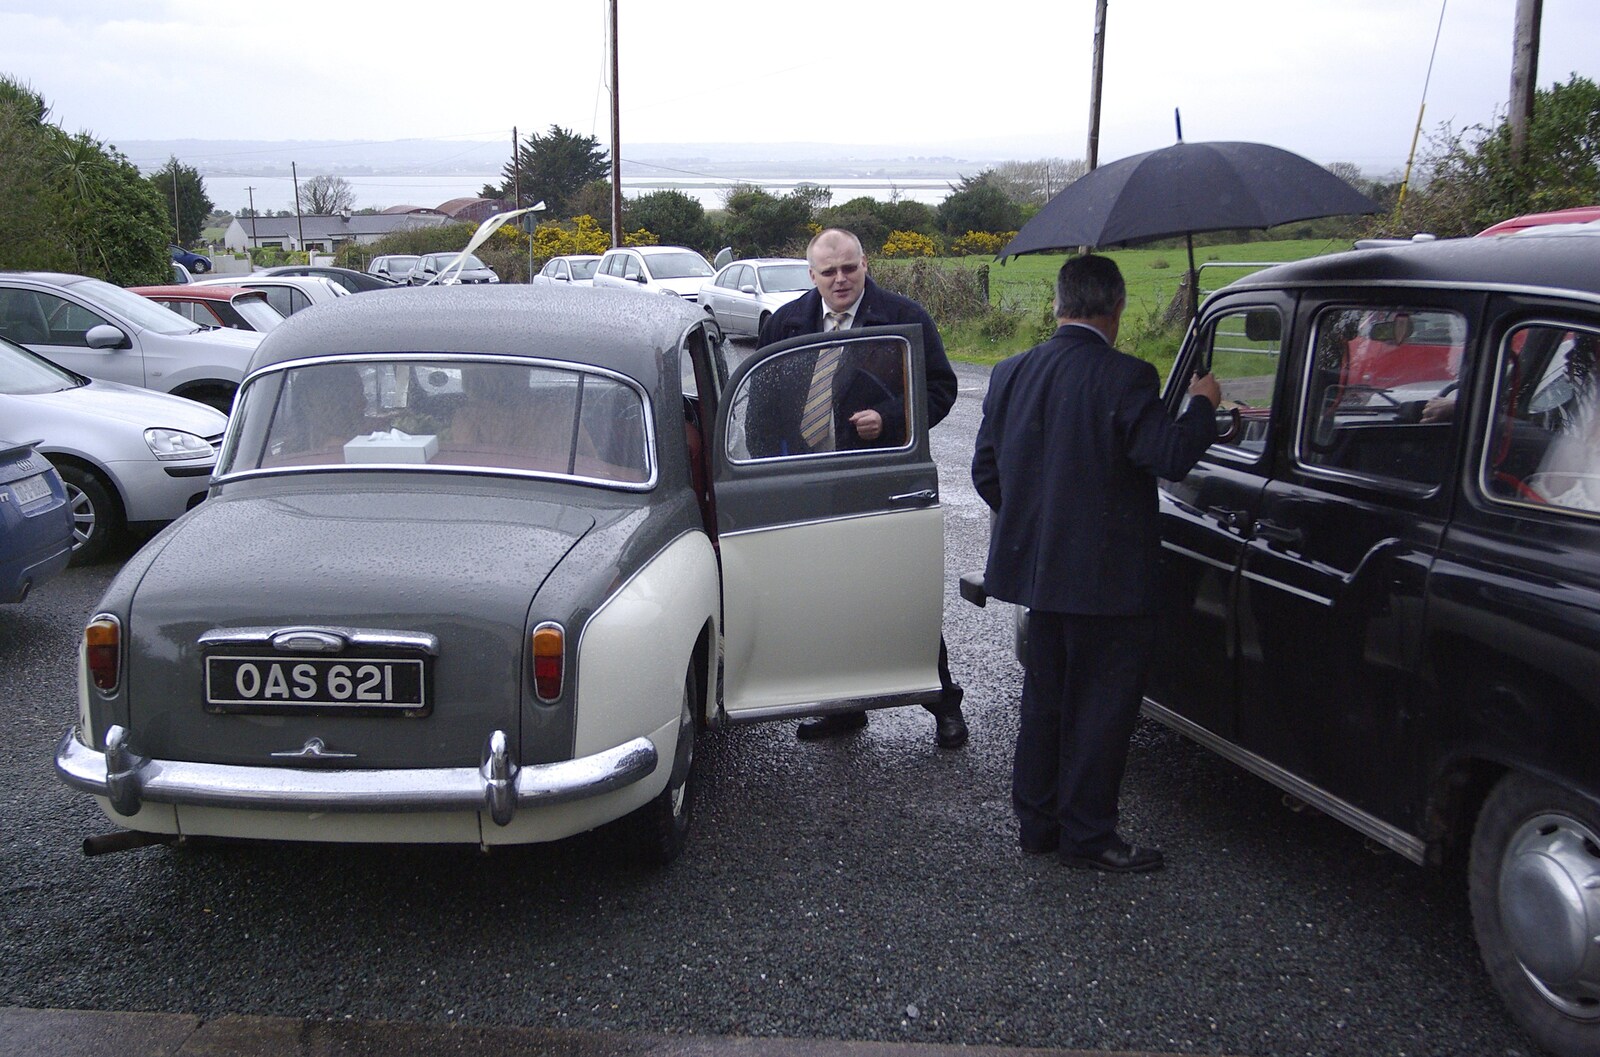 Paul and Jenny's Wedding, Tralee, County Kerry, Ireland - 3rd May 2008: A nice old Austin Riley and a London Black Cab